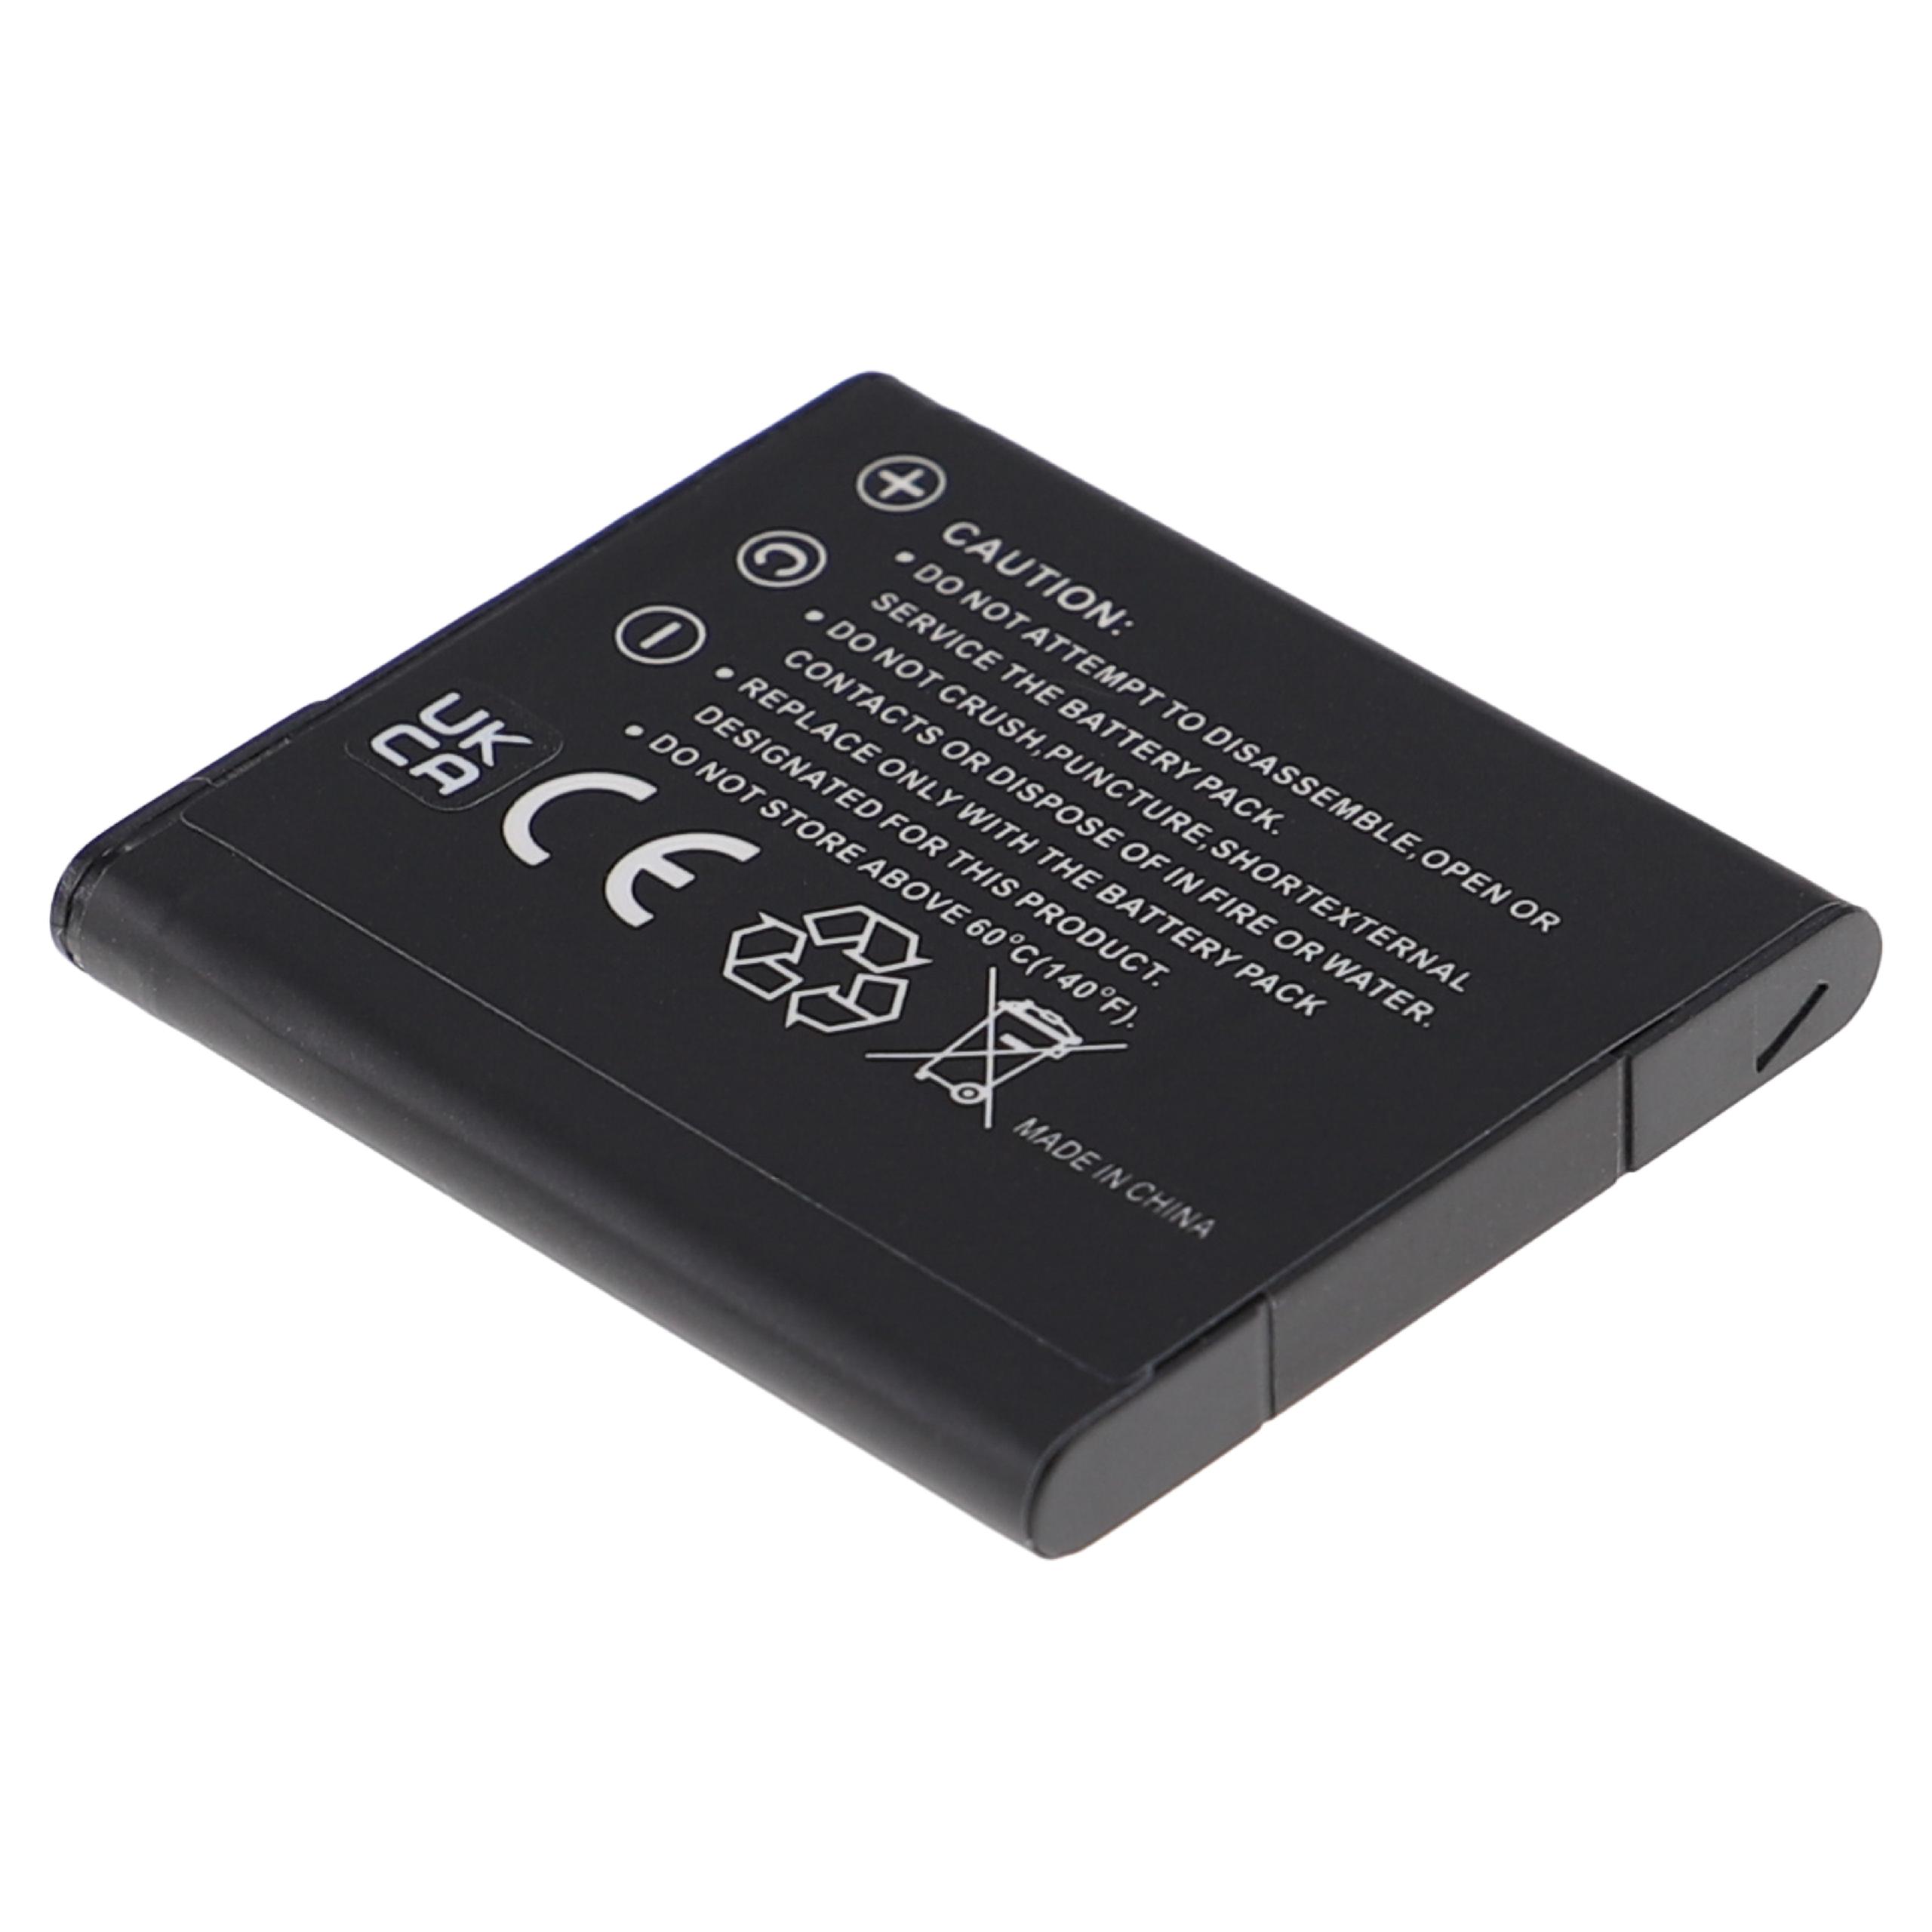 Battery Replacement for Sony NP-BN1 - 630mAh, 3.7V, Li-Ion